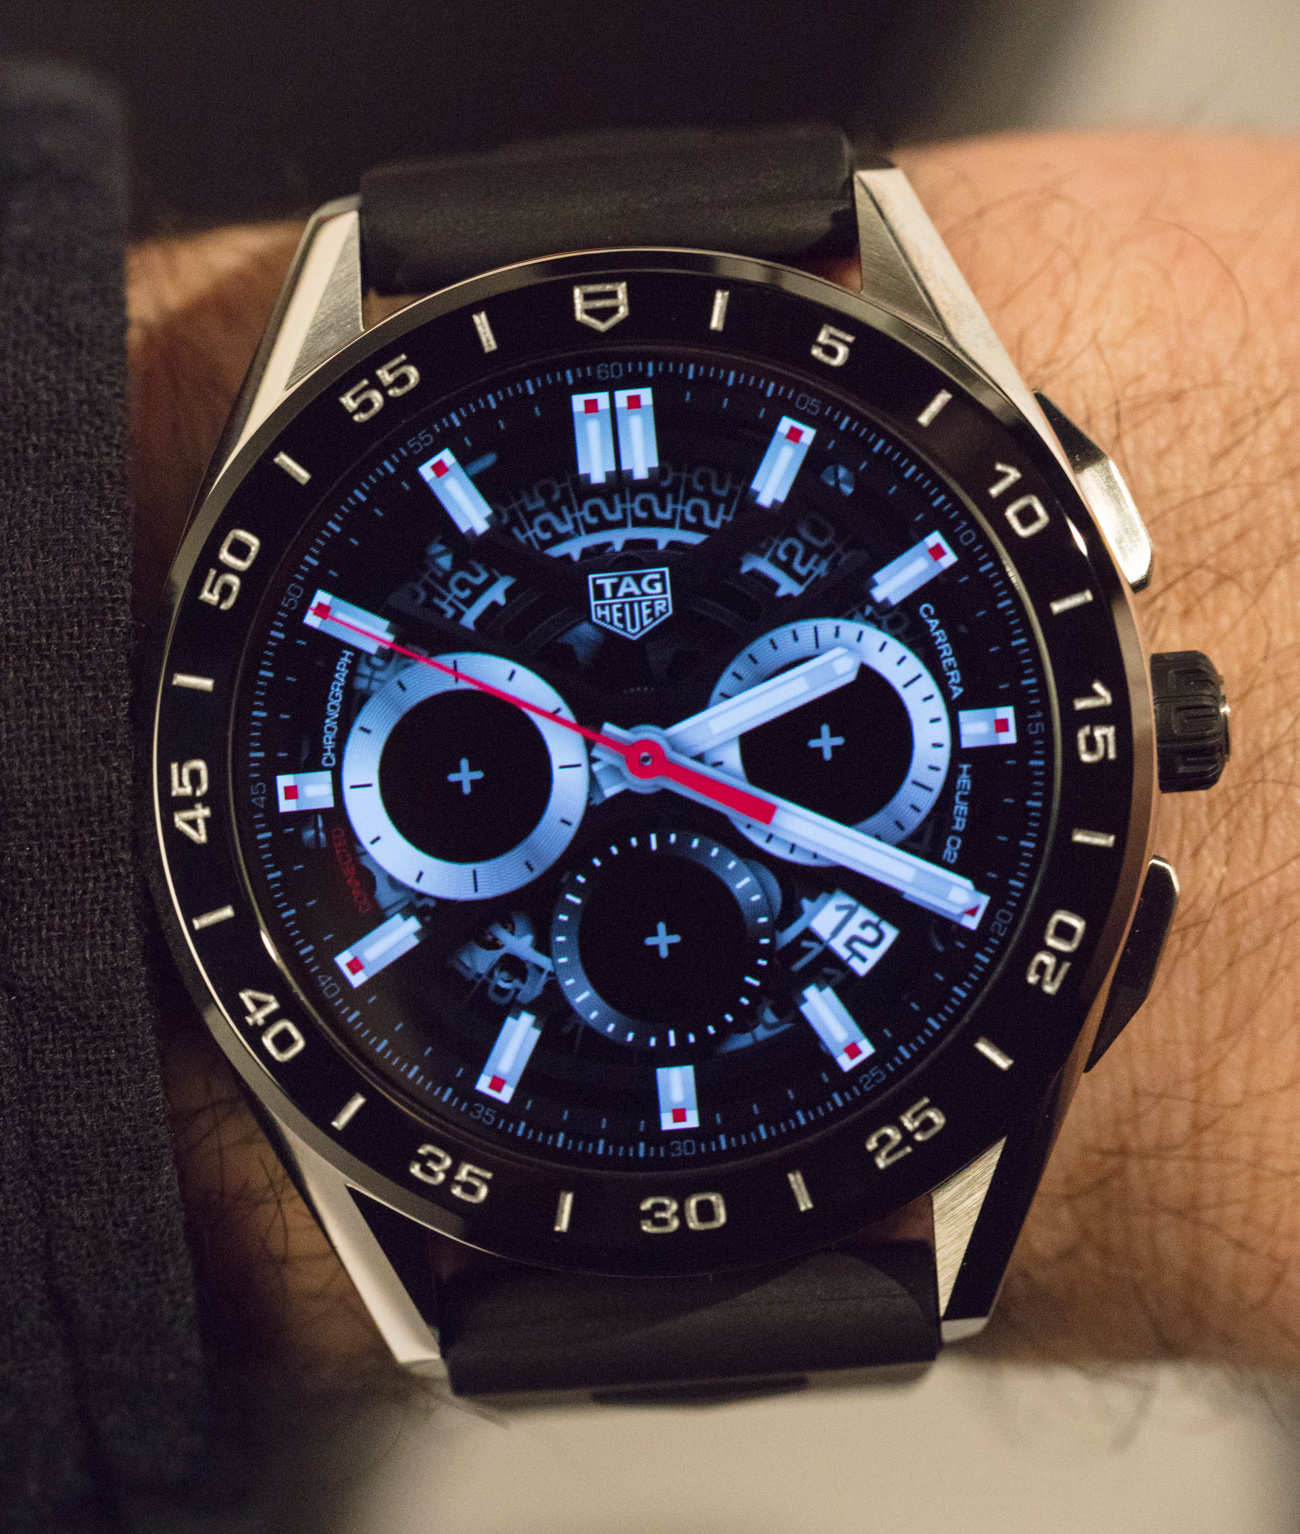 Tag Heuer Connected Modular 45 Smartwatch - Hands On Review 